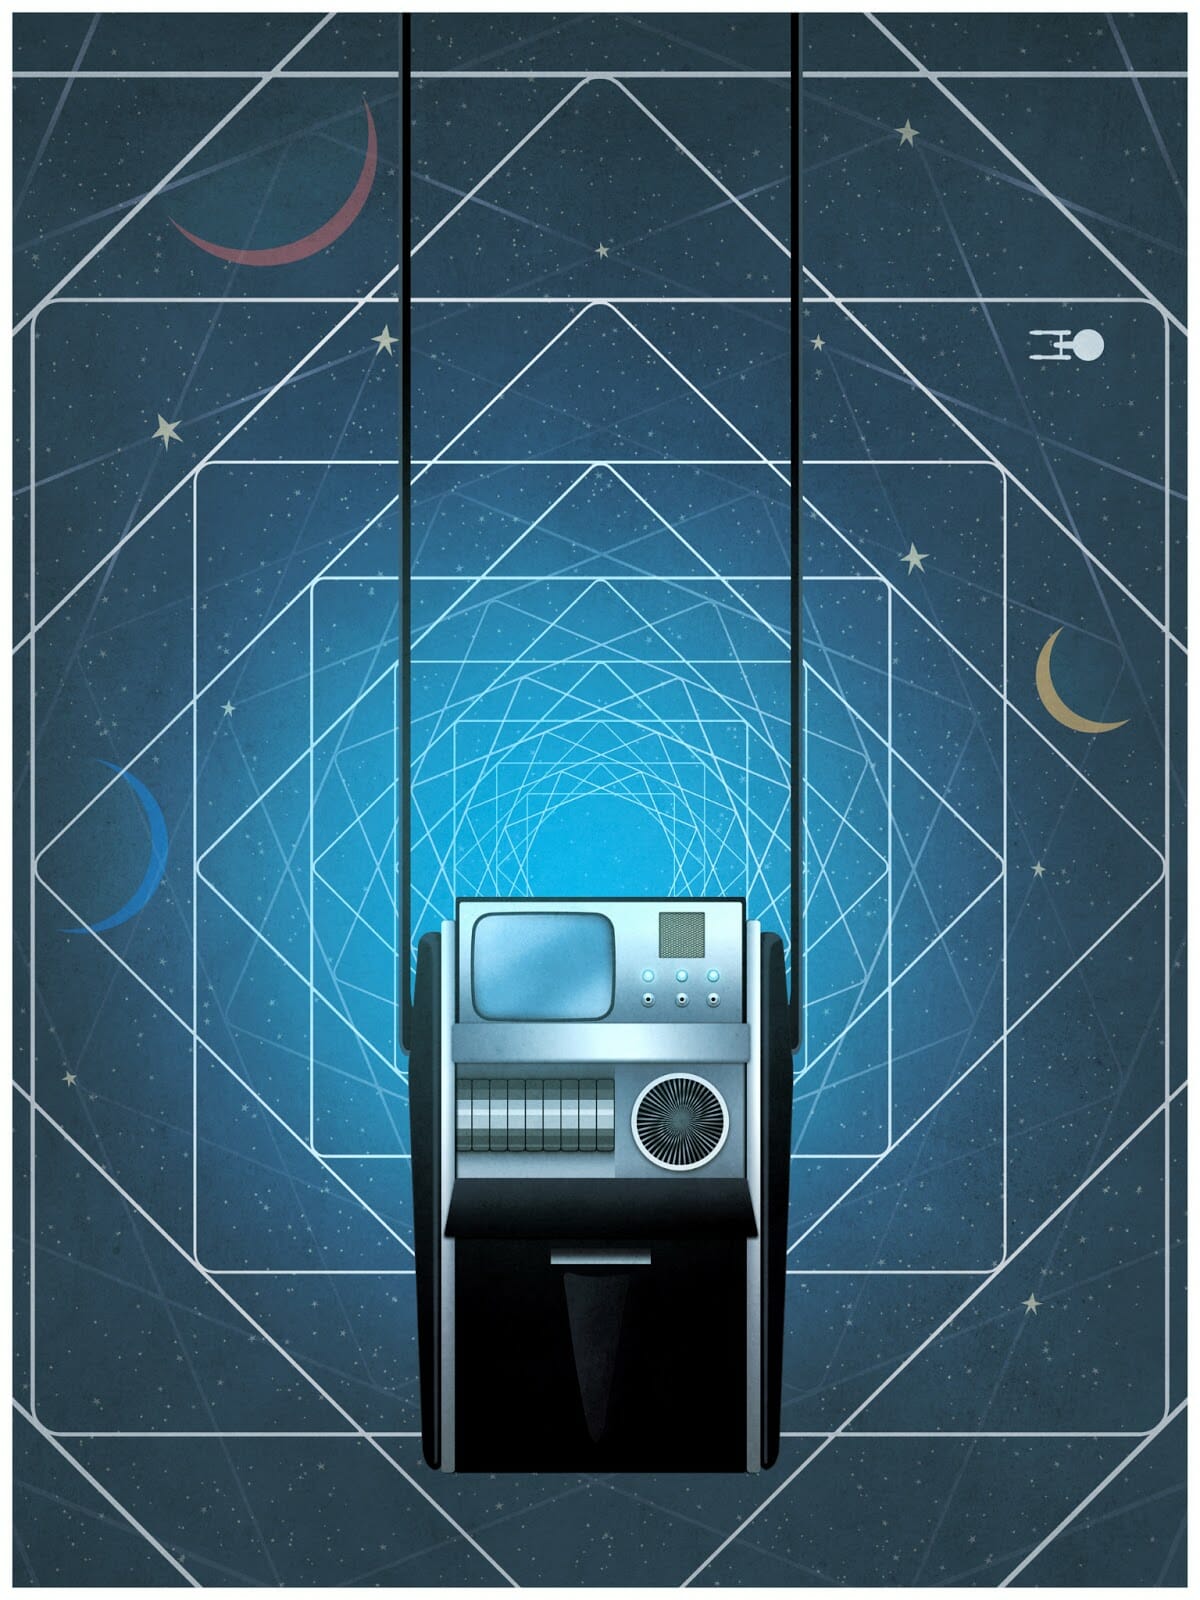 A poster of a black box with buttons and screens on a blue background with geometric shapes - Star Trek